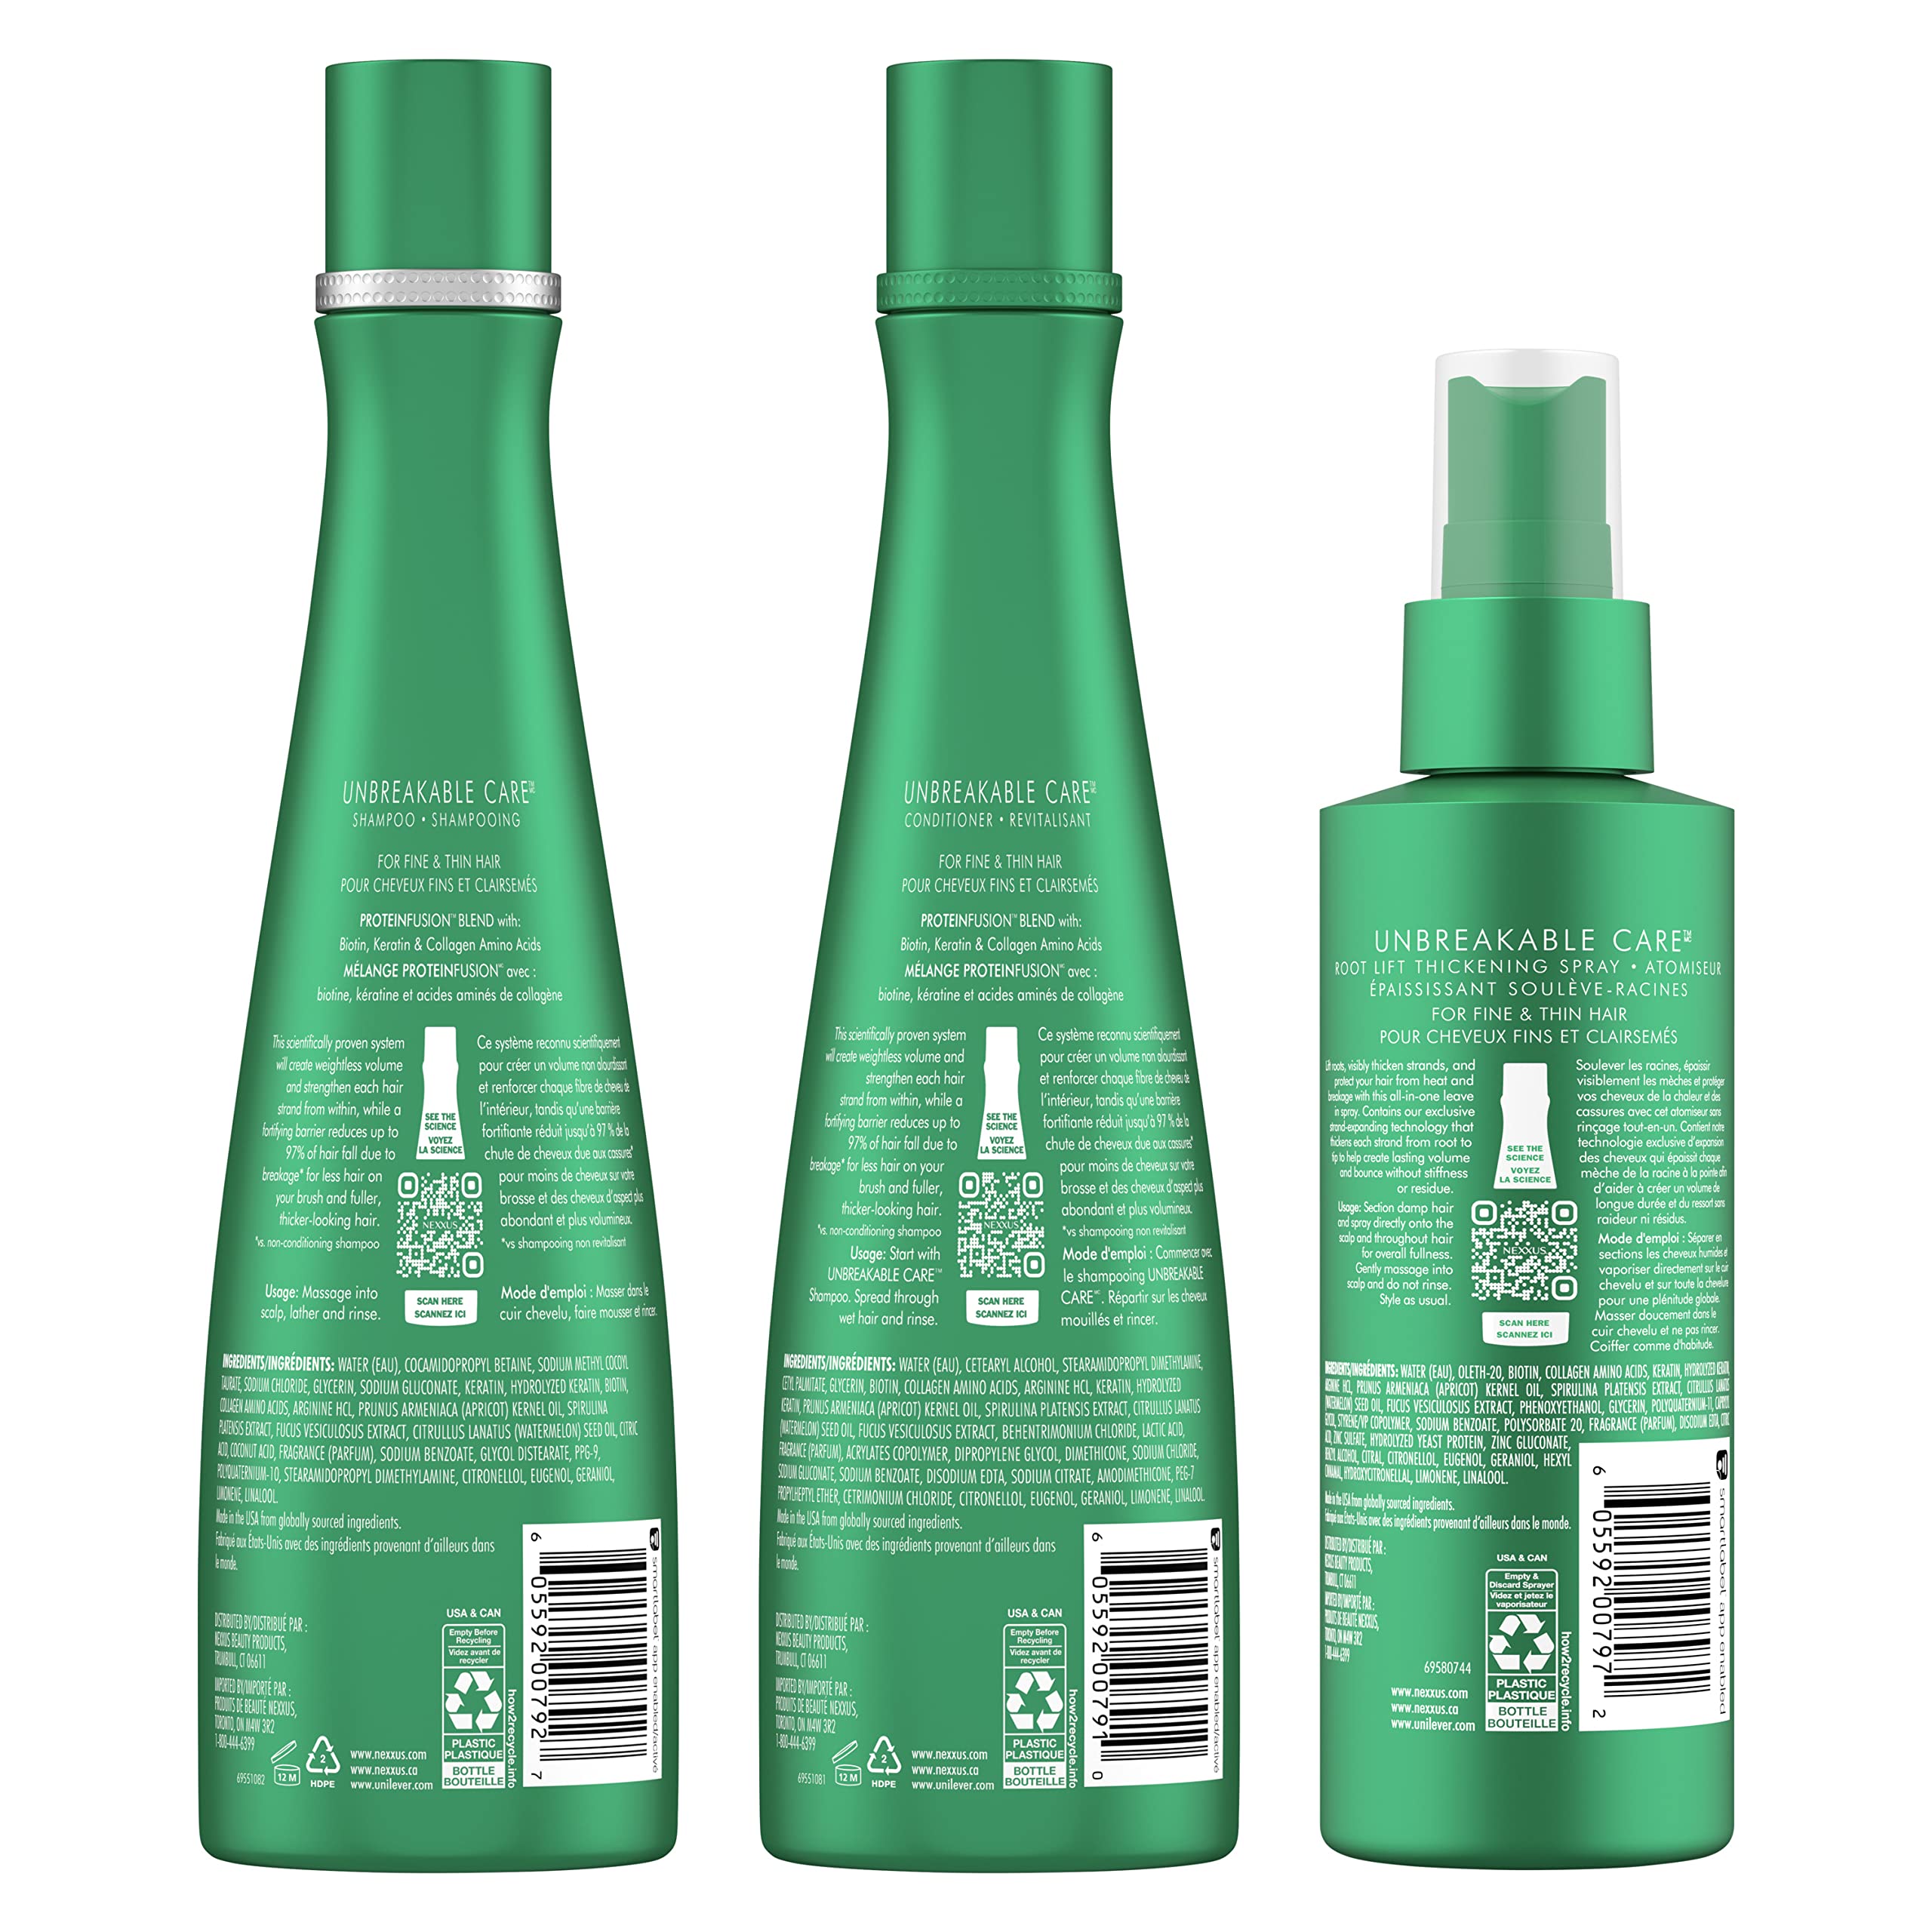 Nexxus Unbreakable Care Shampoo, Conditioner, and Leave-In Spray 3 Pack For Fine and Thin Hair with Keratin, Collagen, Biotin (White)